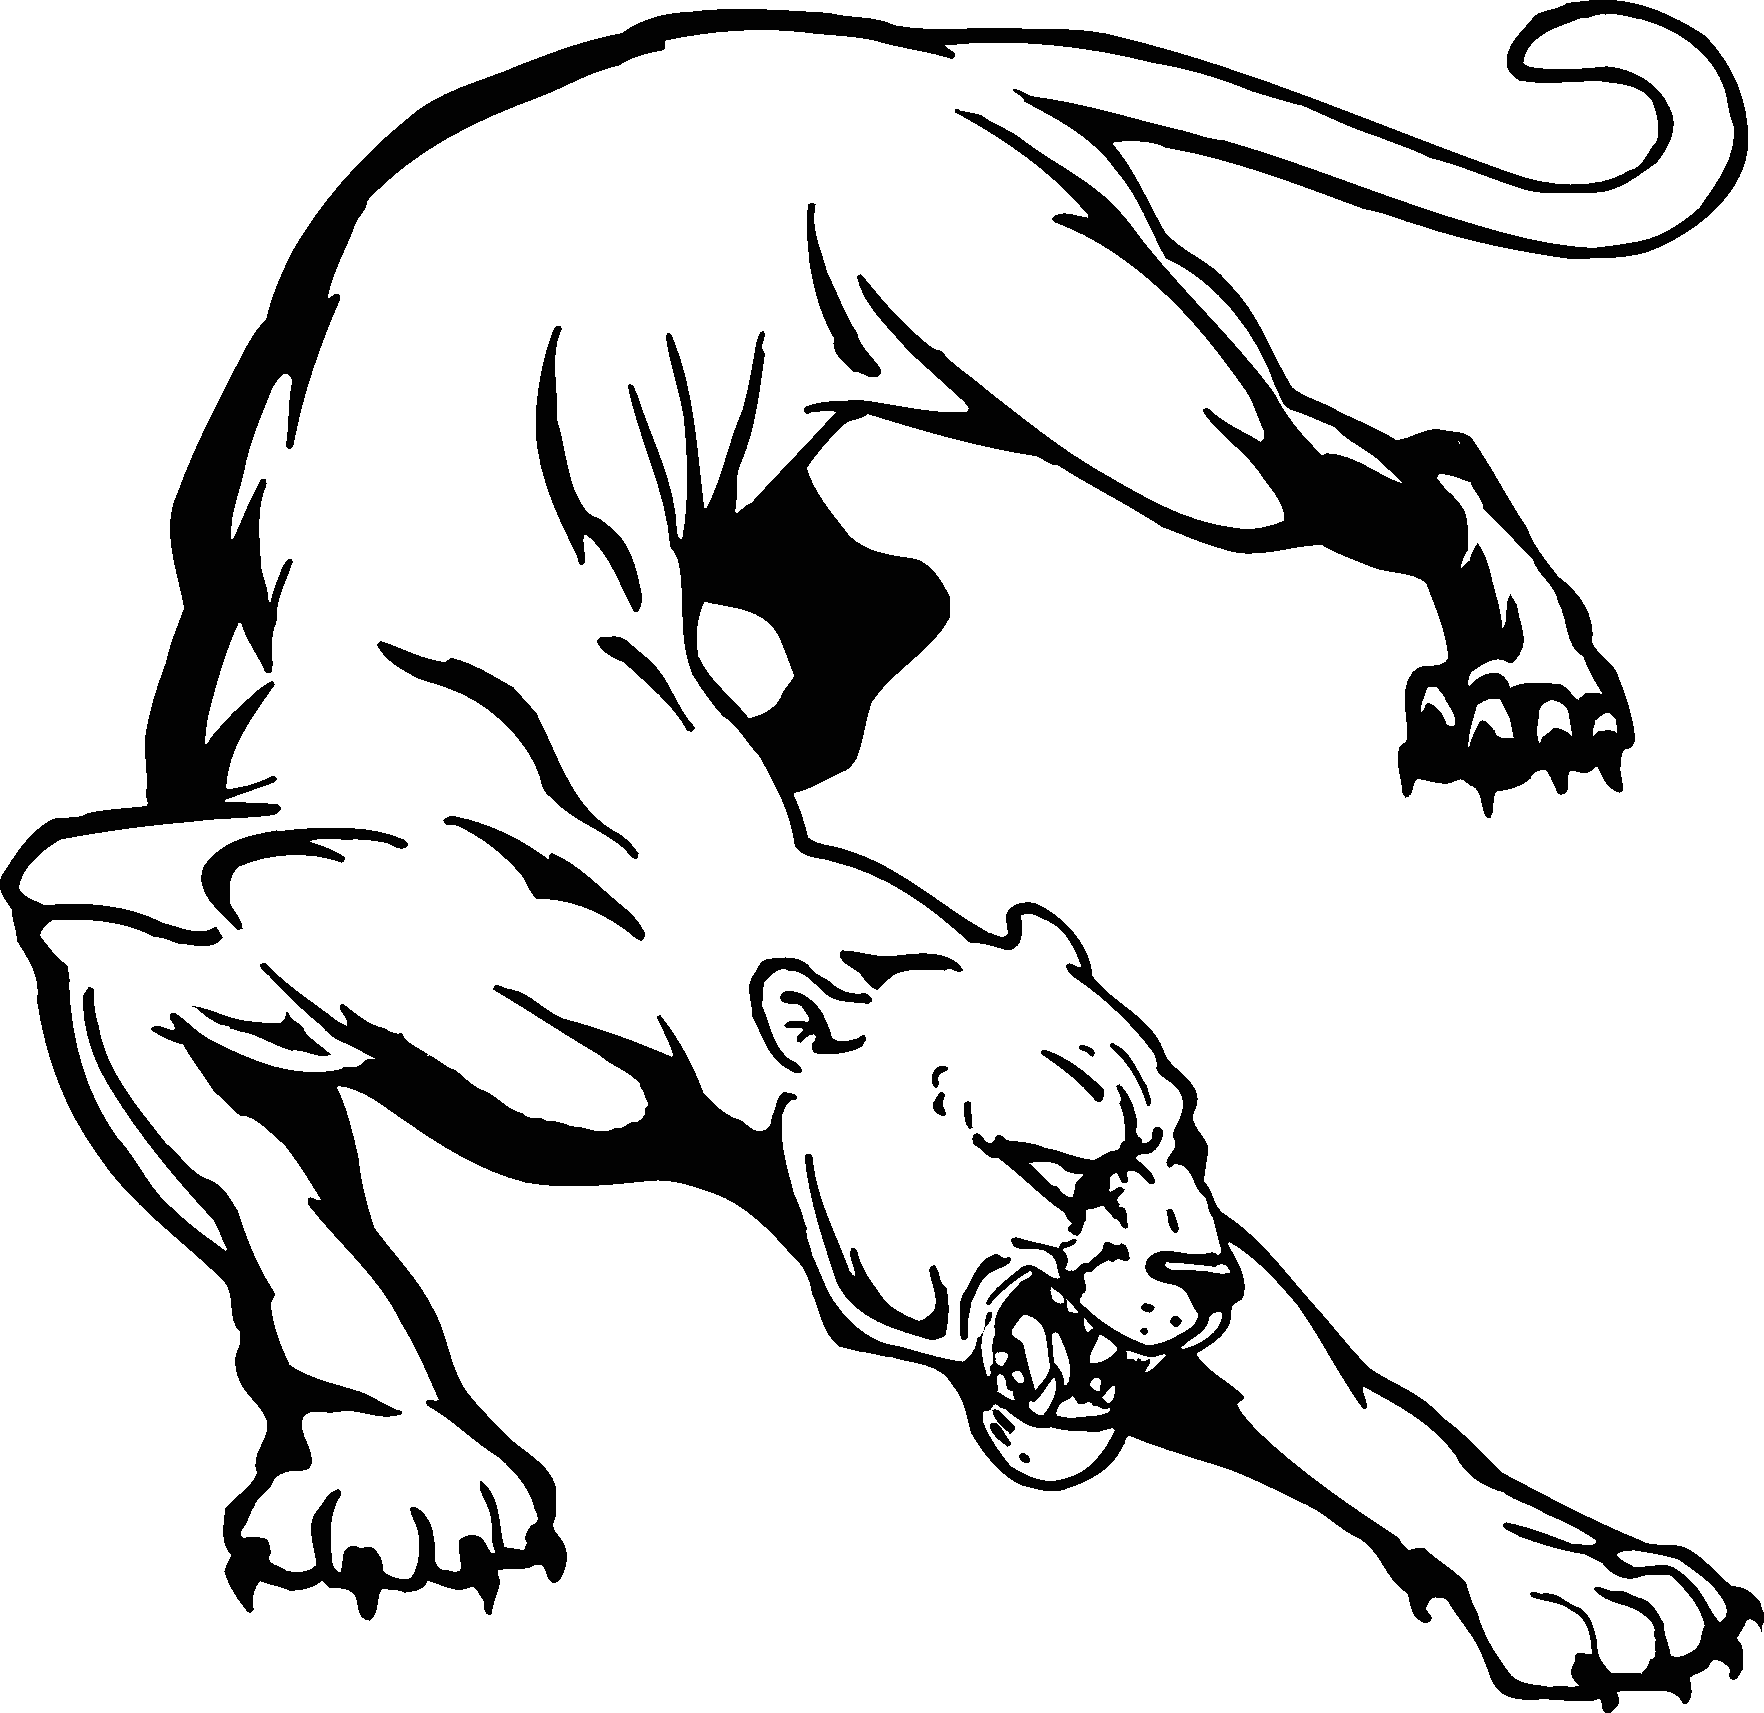 panther clipart outline